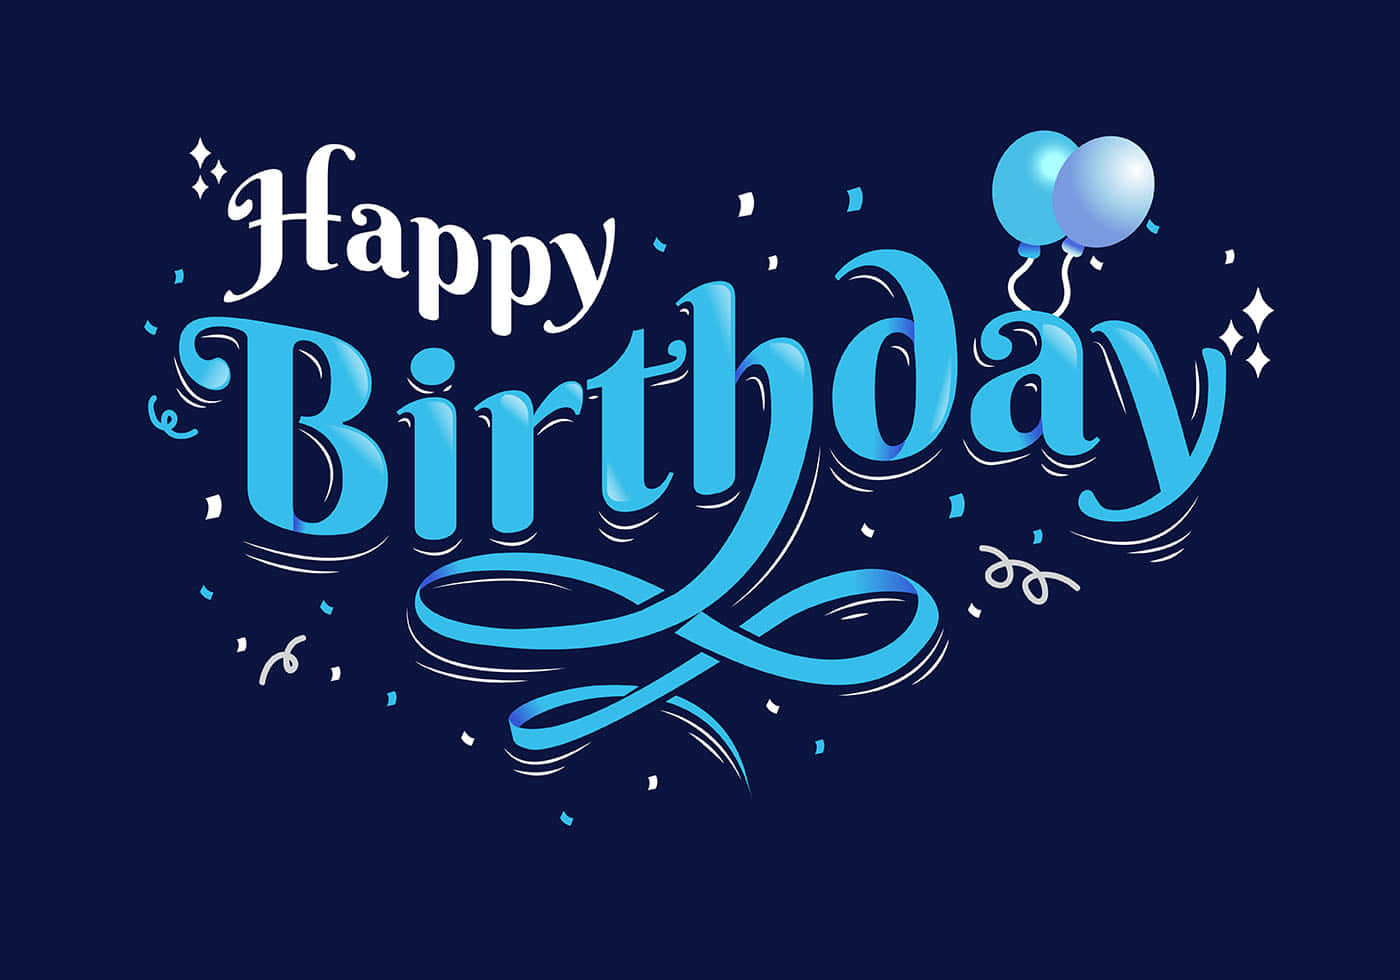 A beautiful blue birthday background with a festive atmosphere.